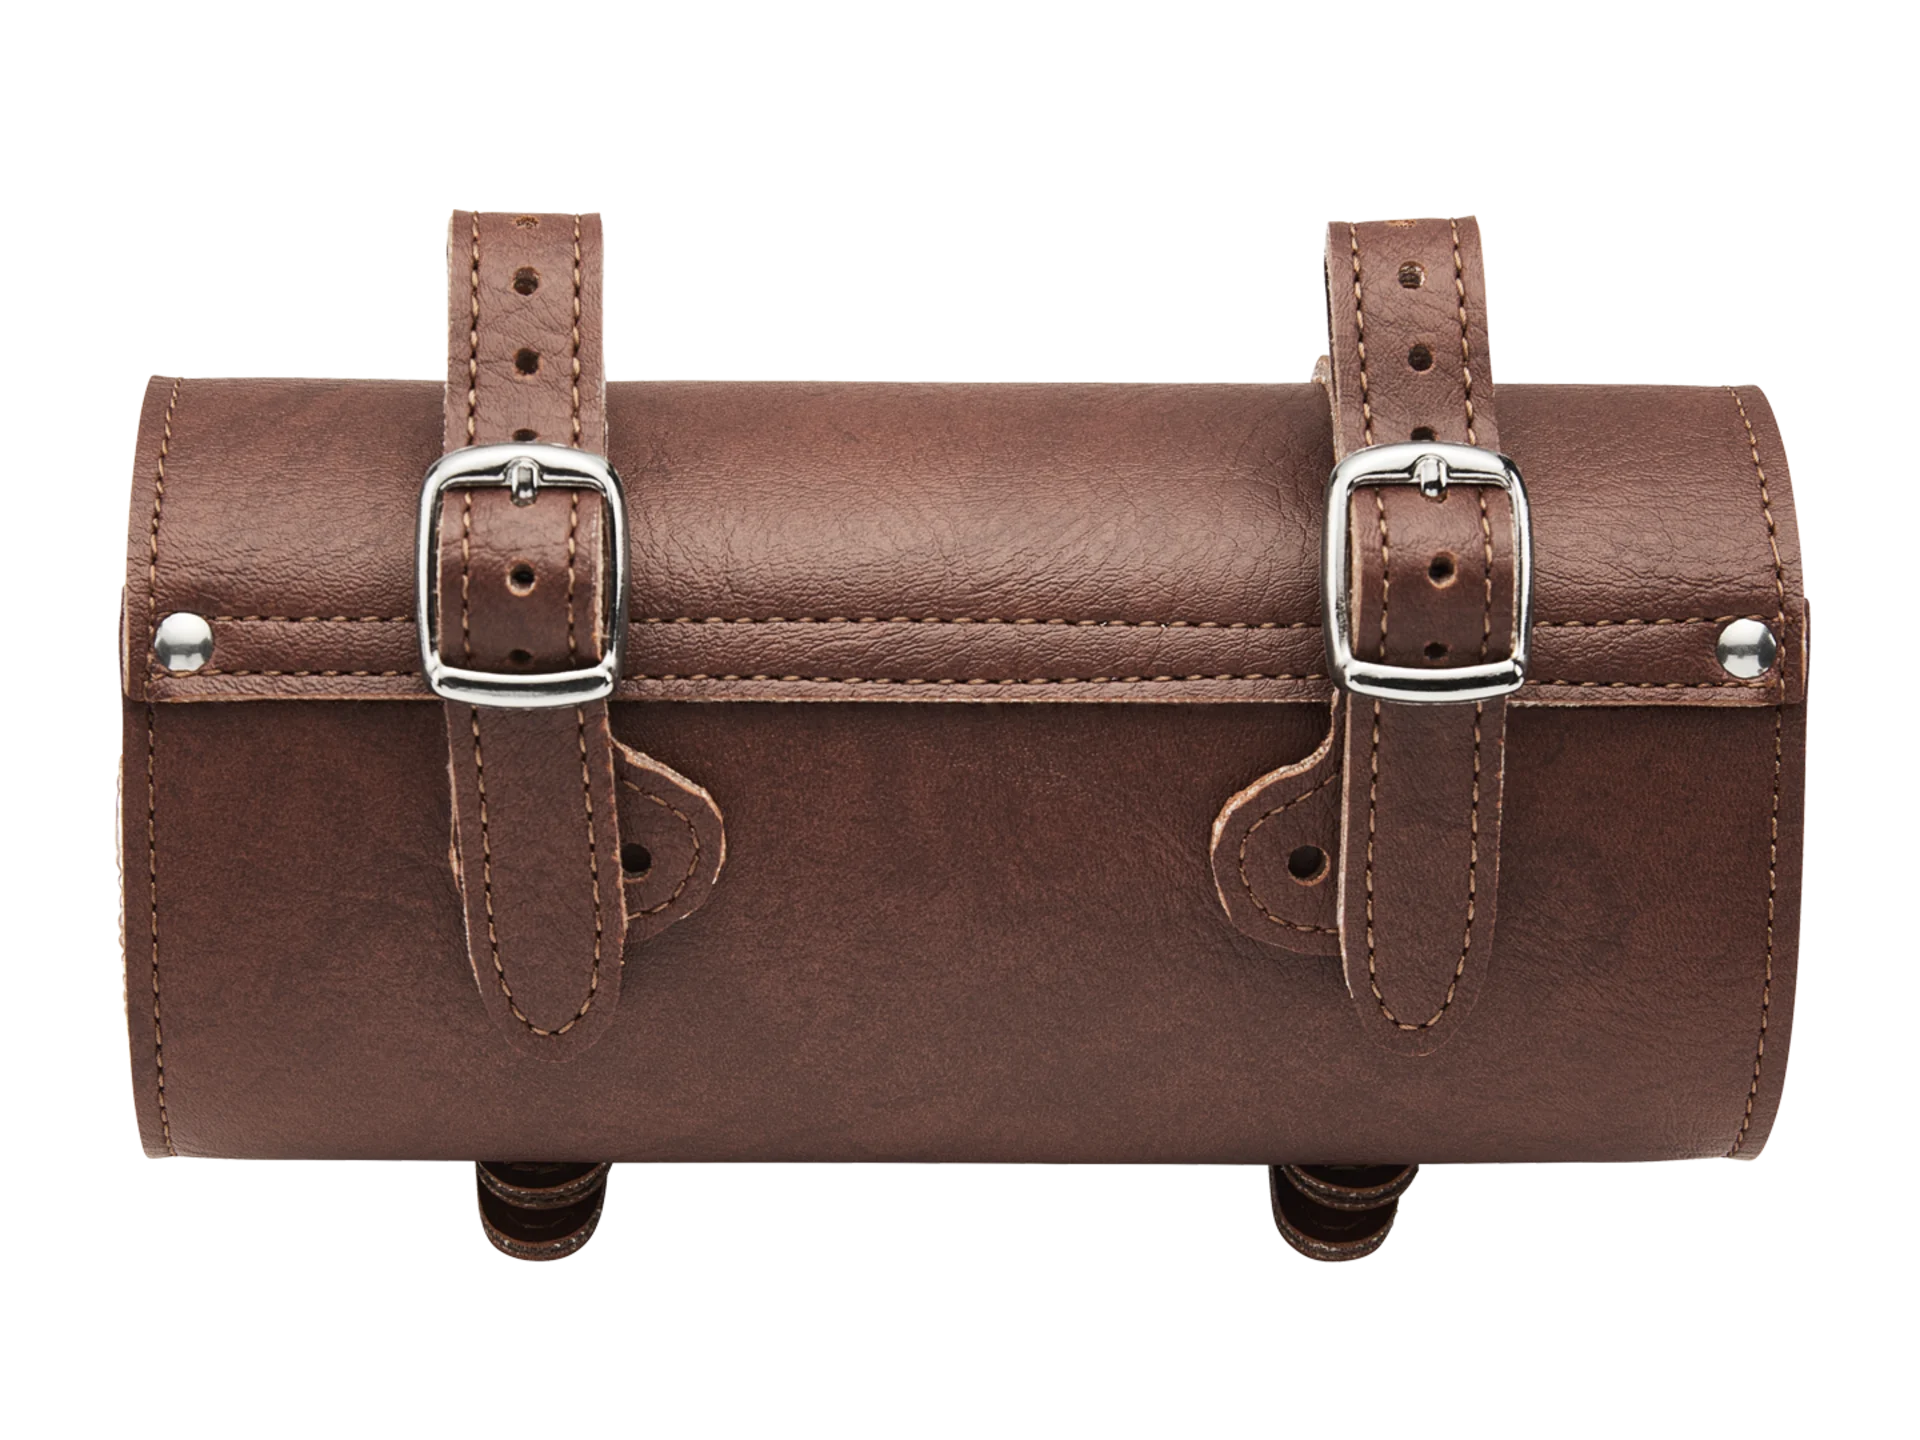 Electra Classic Faux Leather Tool Bag - Brown